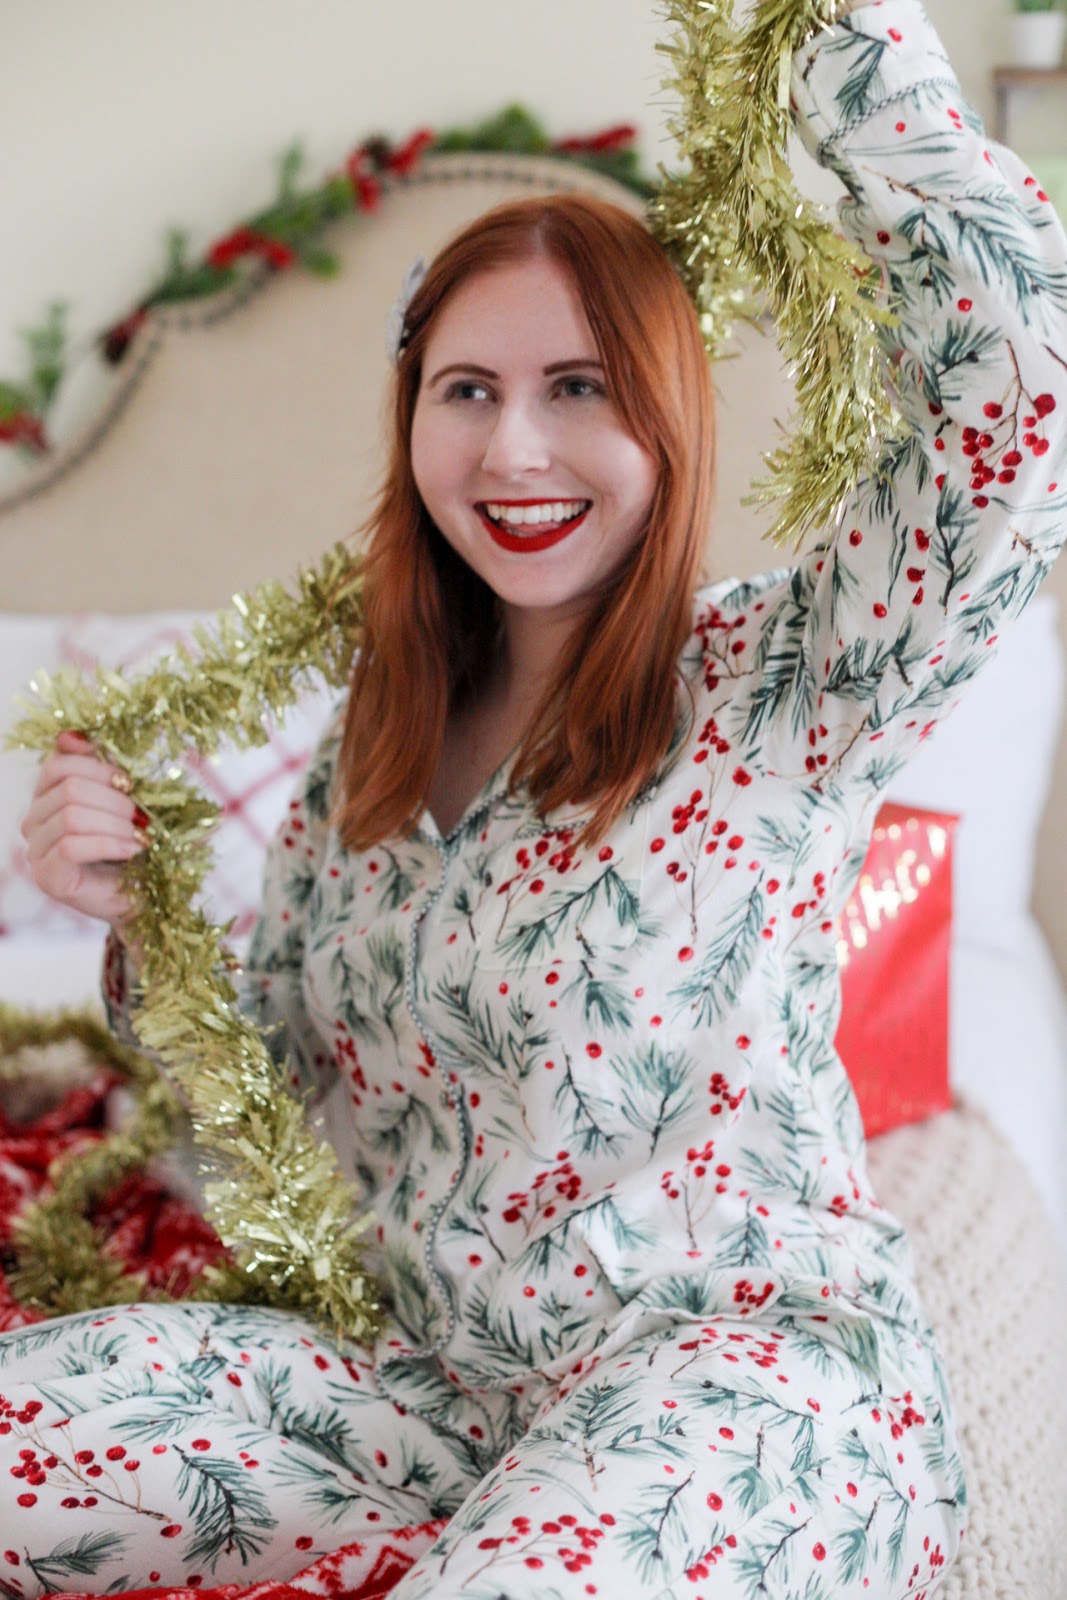 Affordable by Amanda, Tampa Style Blogger Sharing Festive Matching Christmas Pajamas Under $30 For the Holiday Season. She is wearing a pair of holly printed pajamas from stars above collection at Target.